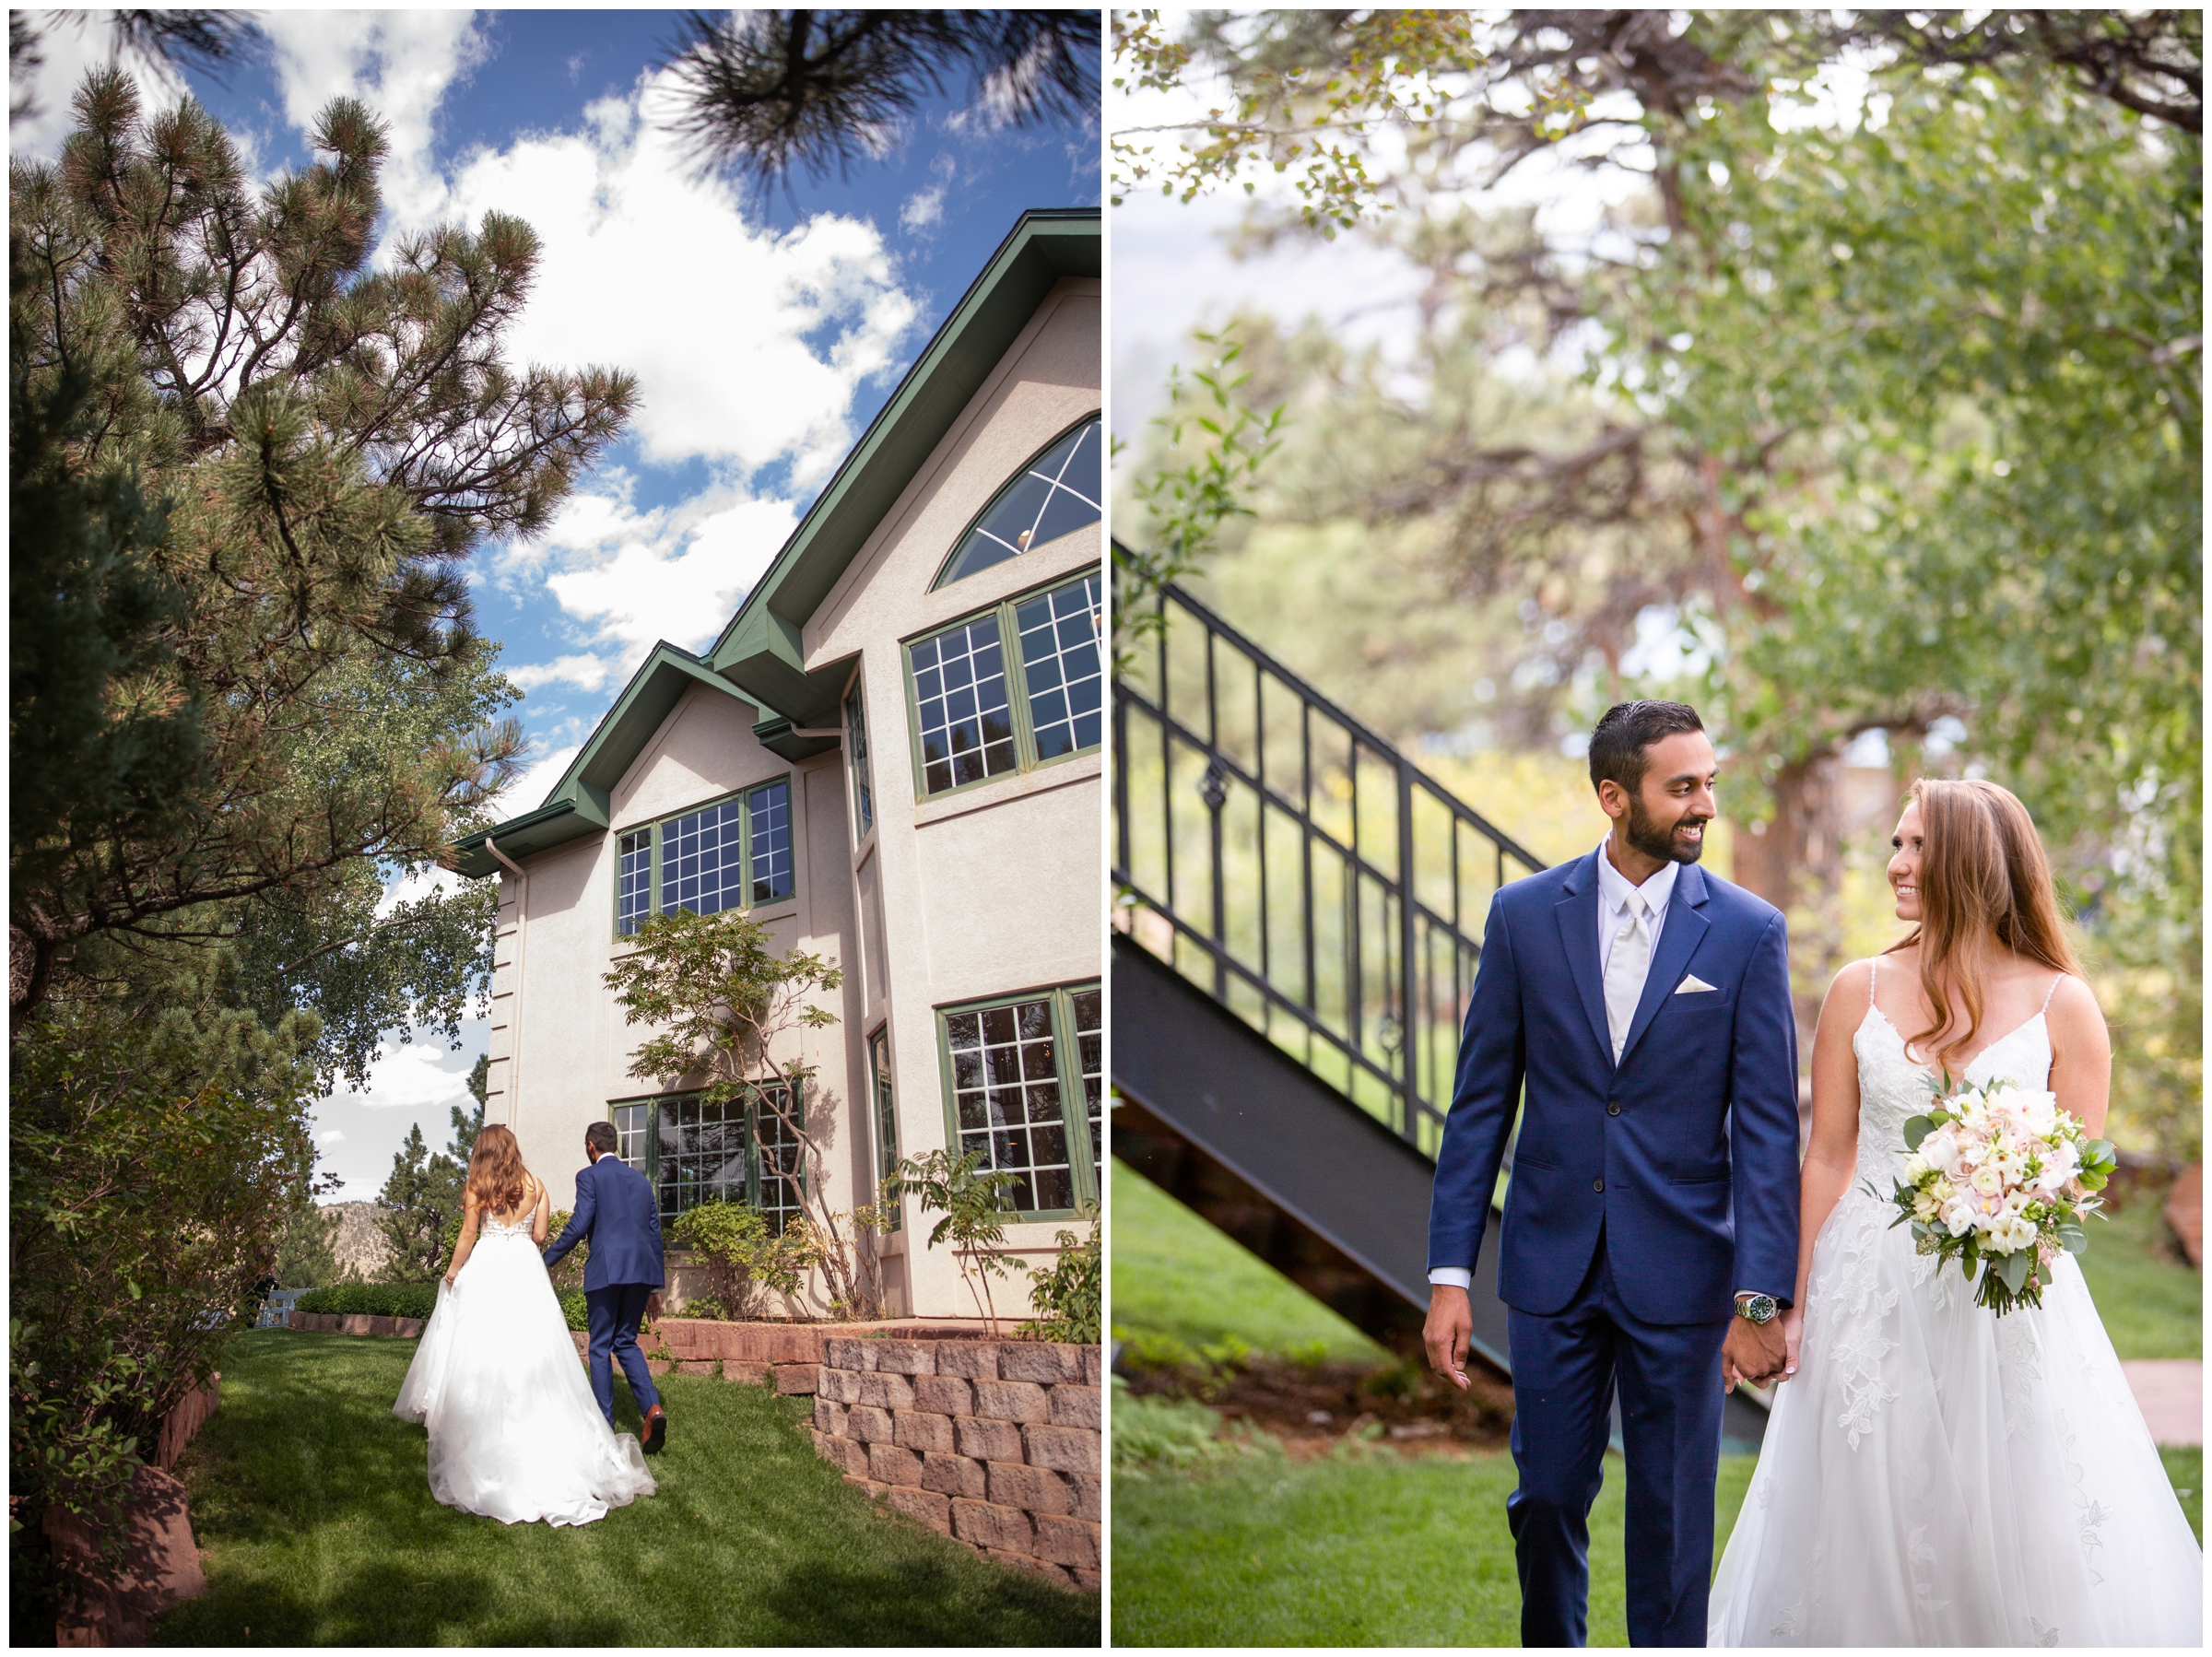 candid wedding photography inspiration at Lionscrest Manor by Plum Pretty Photos